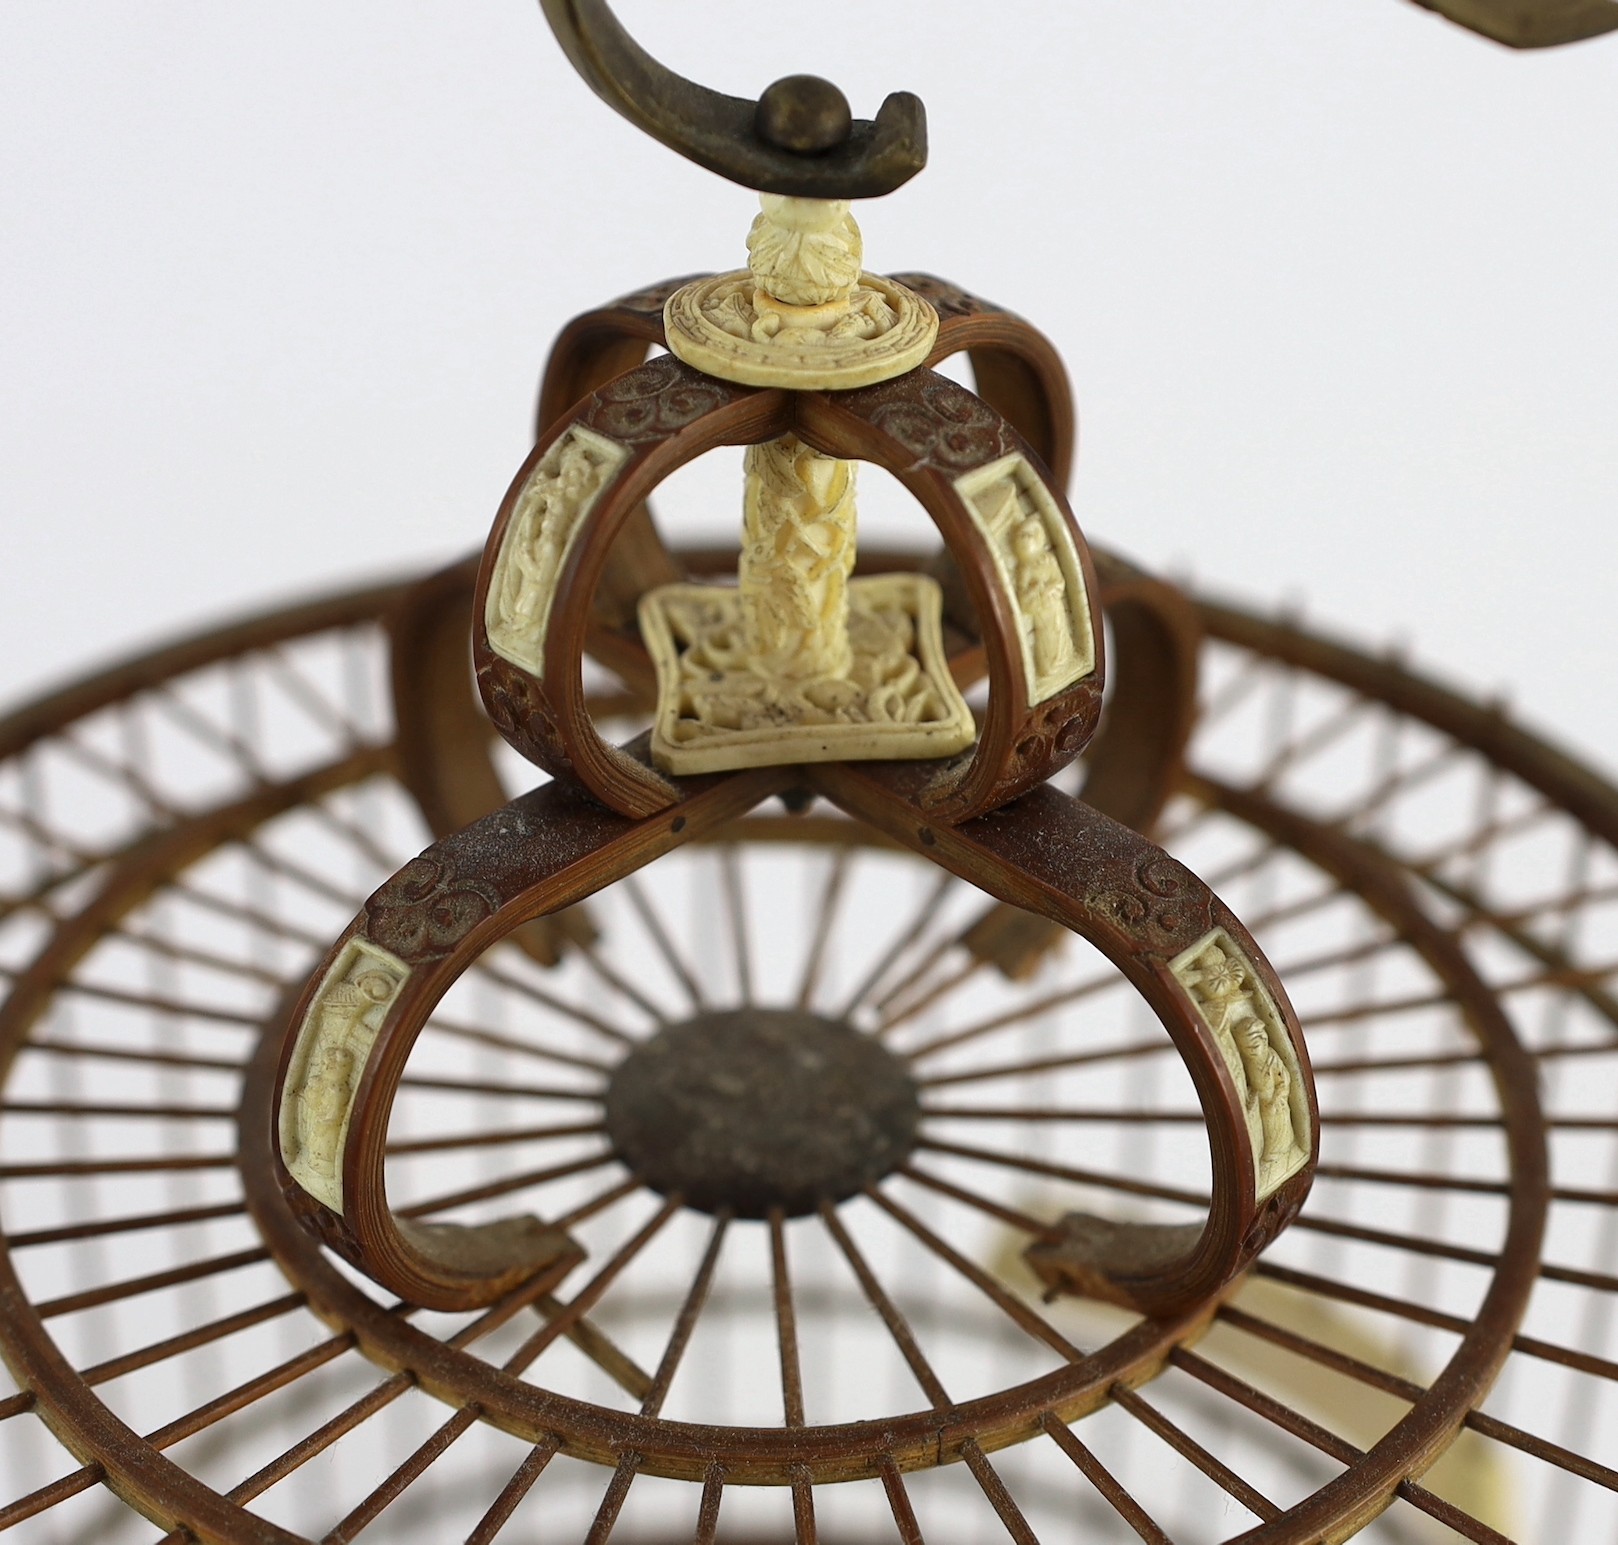 A Chinese bamboo and Guangzhou ivory mounted bird cage, late Qing dynasty, with two Guangxu mark and period porcelain bird feeders (1875-1908), cage 32.5cm high to top of handle